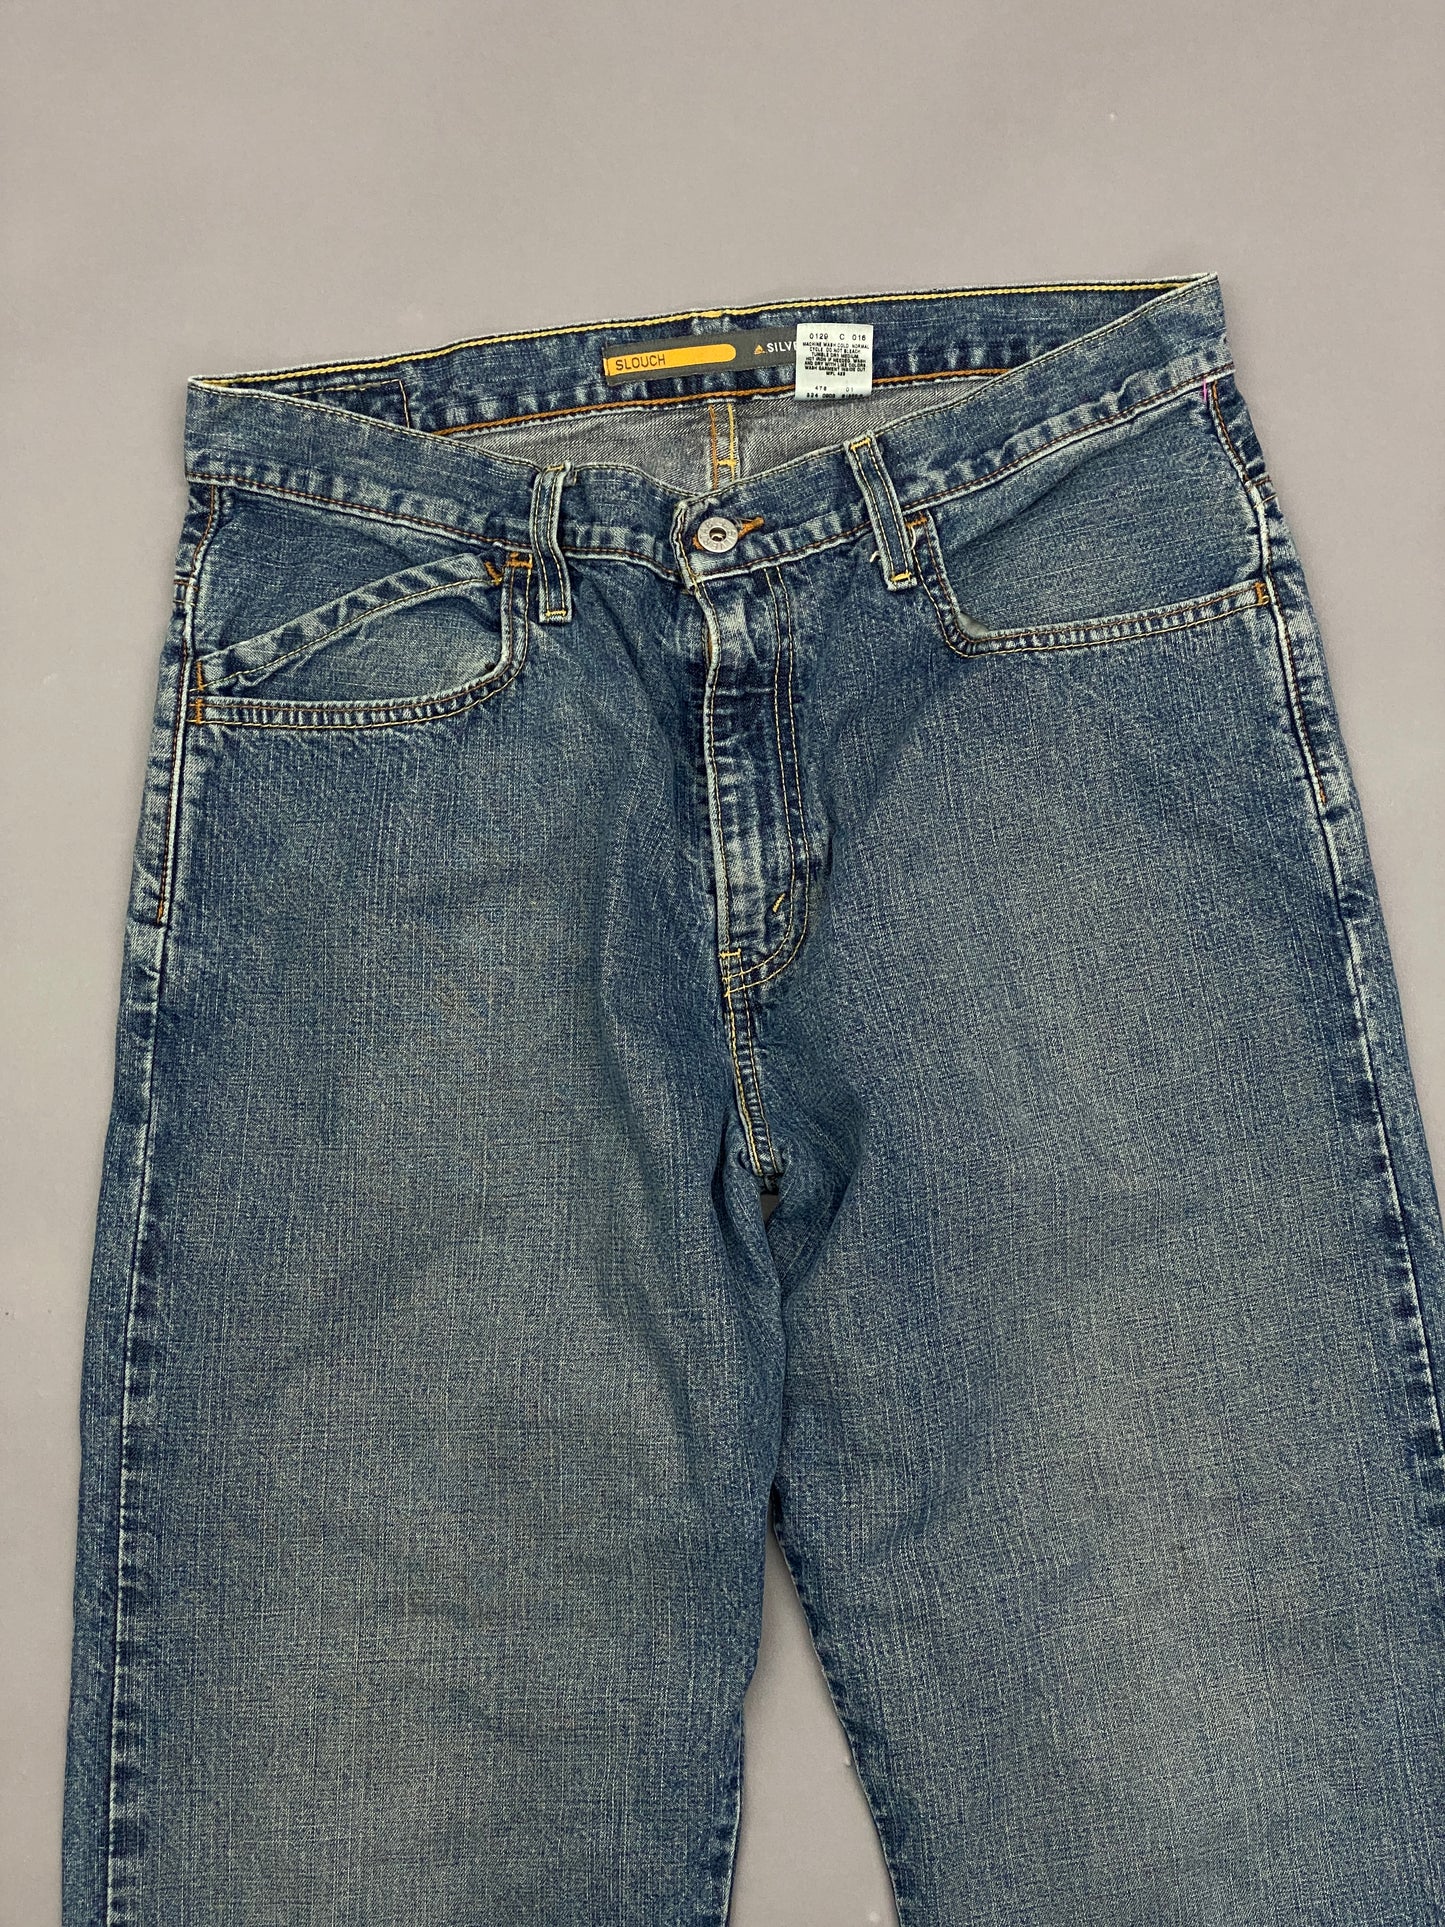 Levis Silvertab Slouch Vintage Jeans - 33 x 32